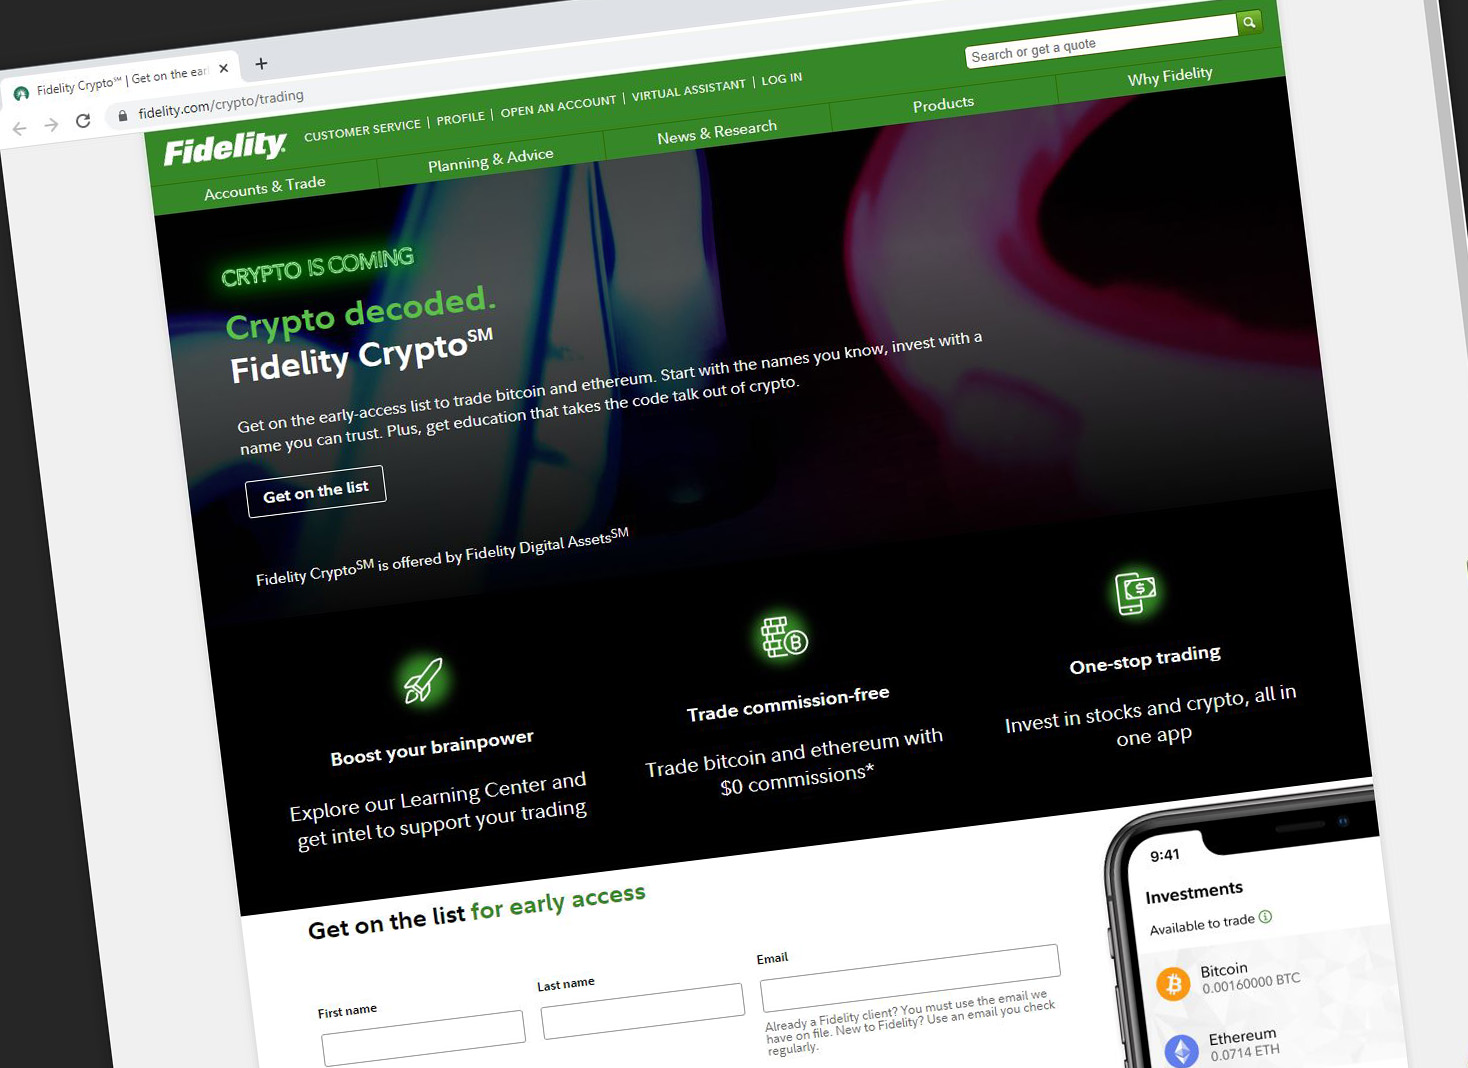 Uphold charges for xfers, Fidelity crypto does not - Rewards (Uphold) - Brave Community